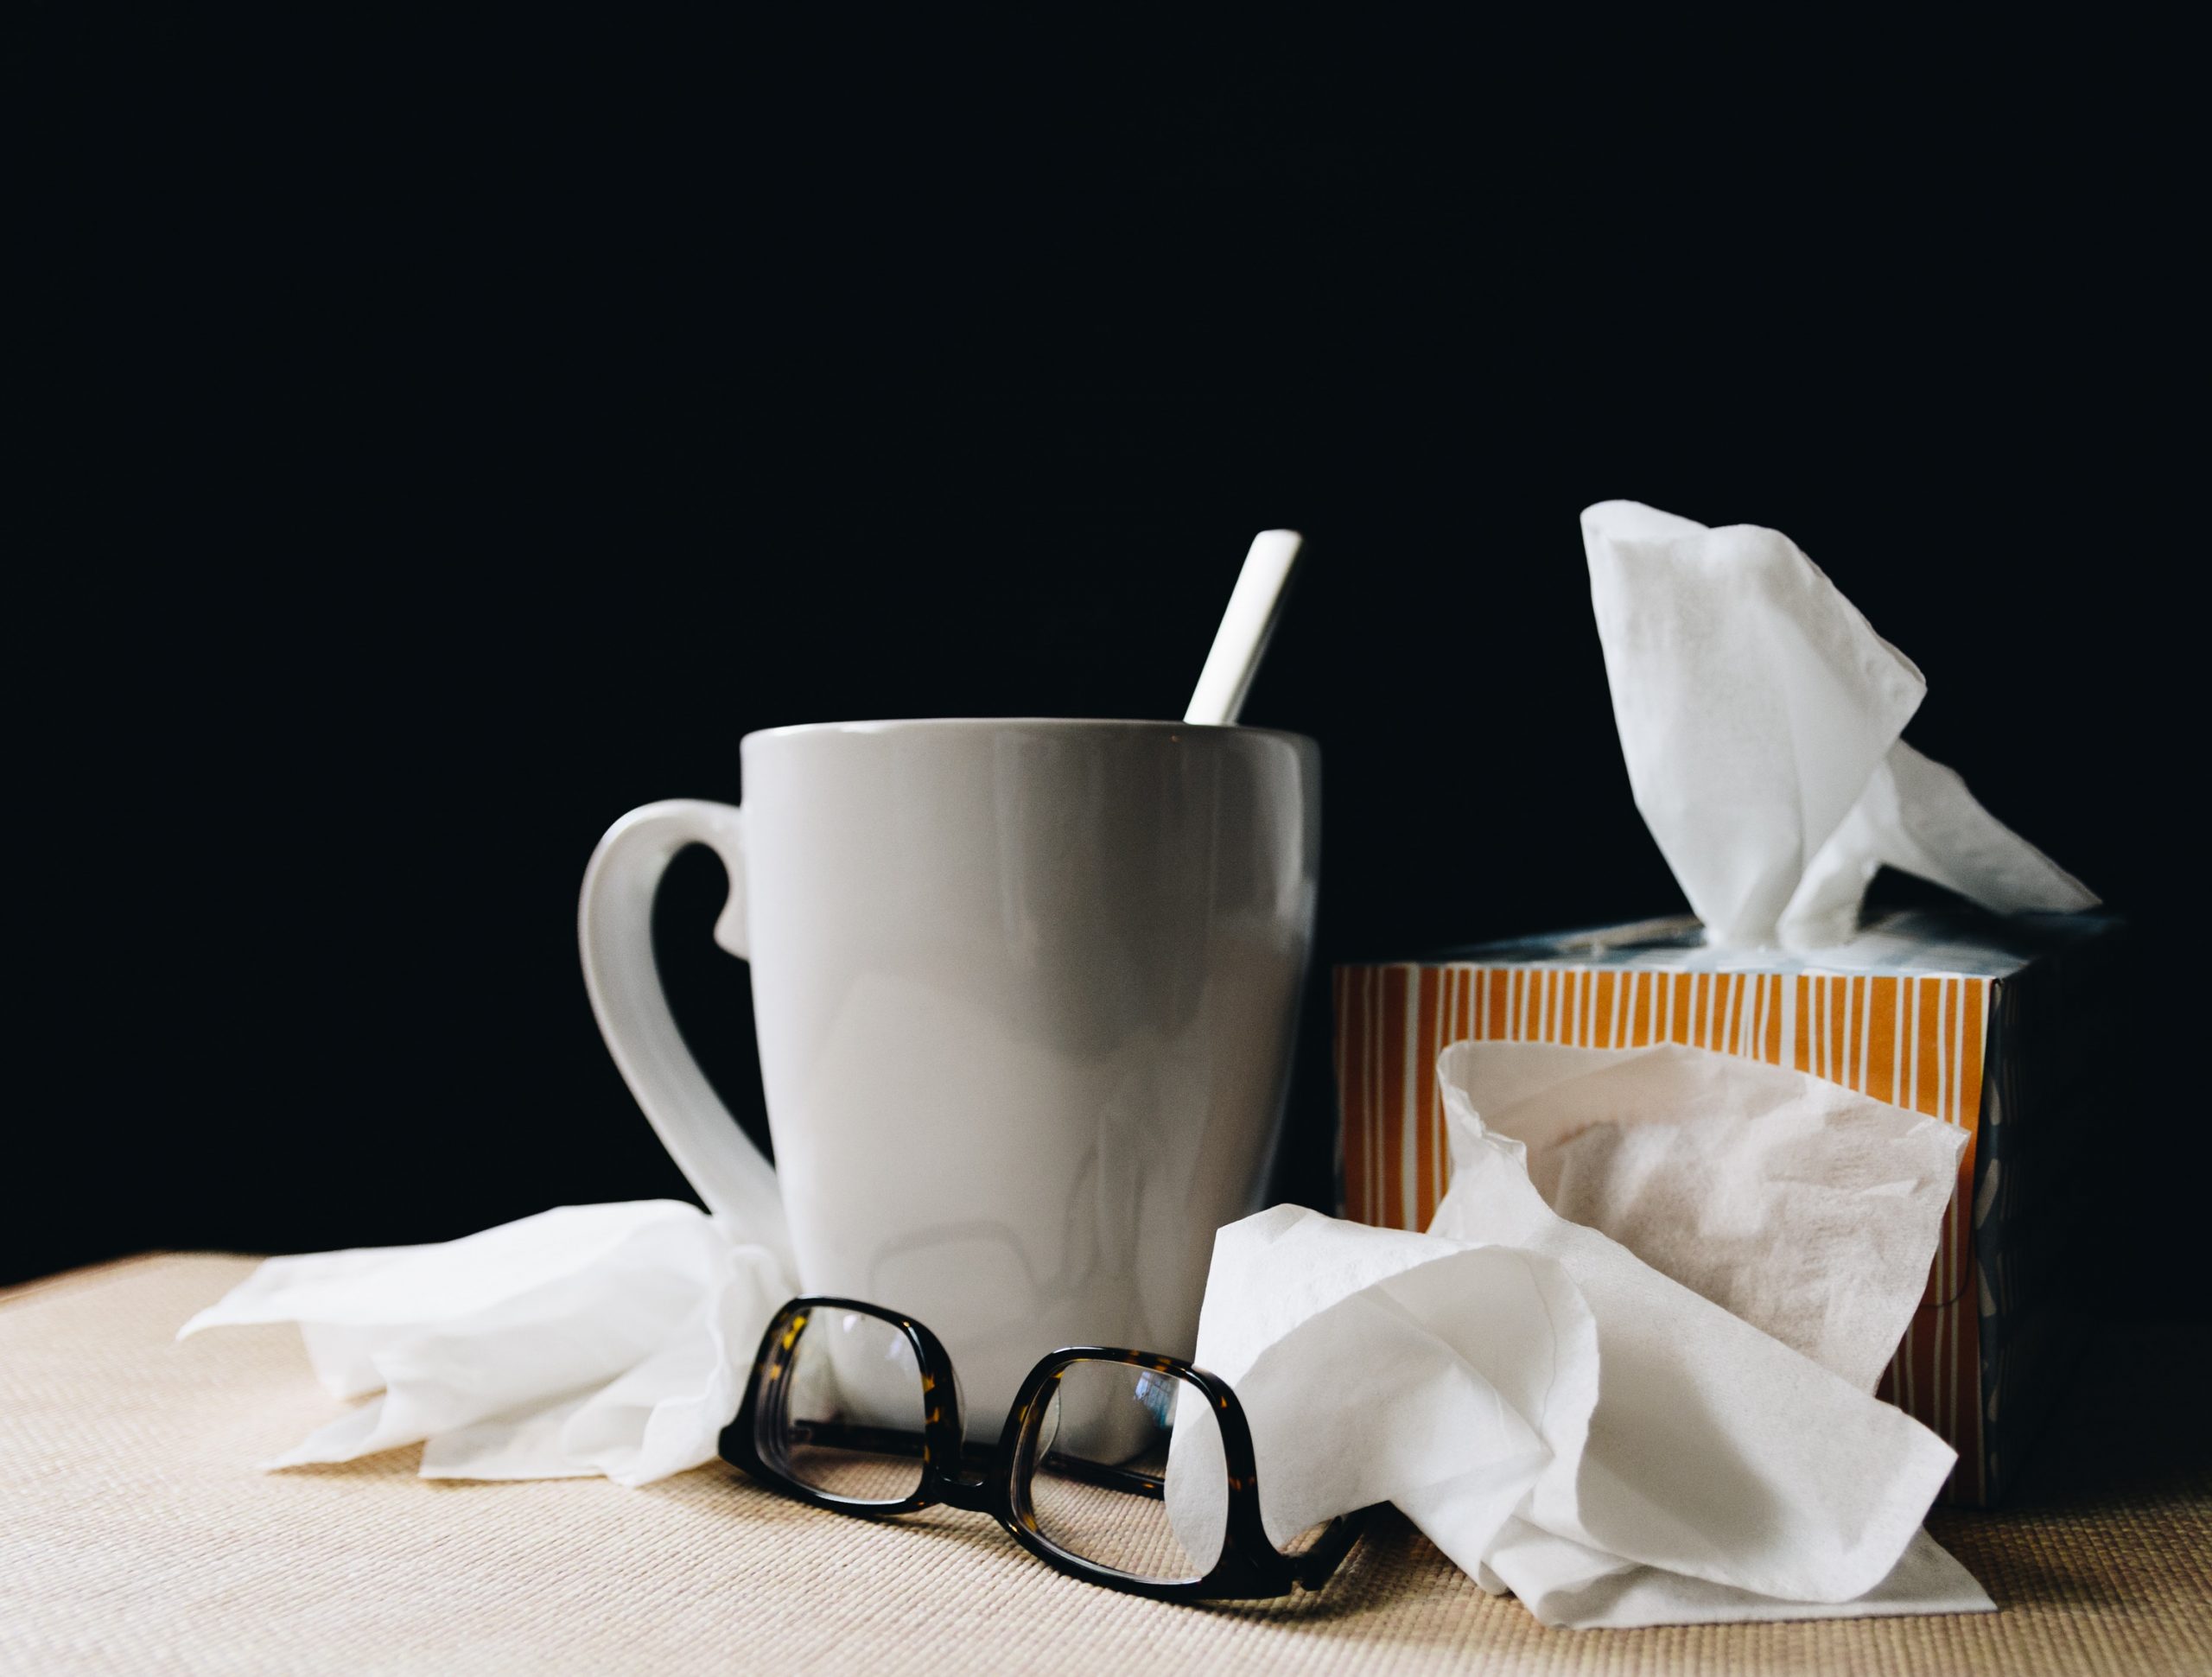 Cup of tea, tissues, and glasses on table, signifying sickness and health care.